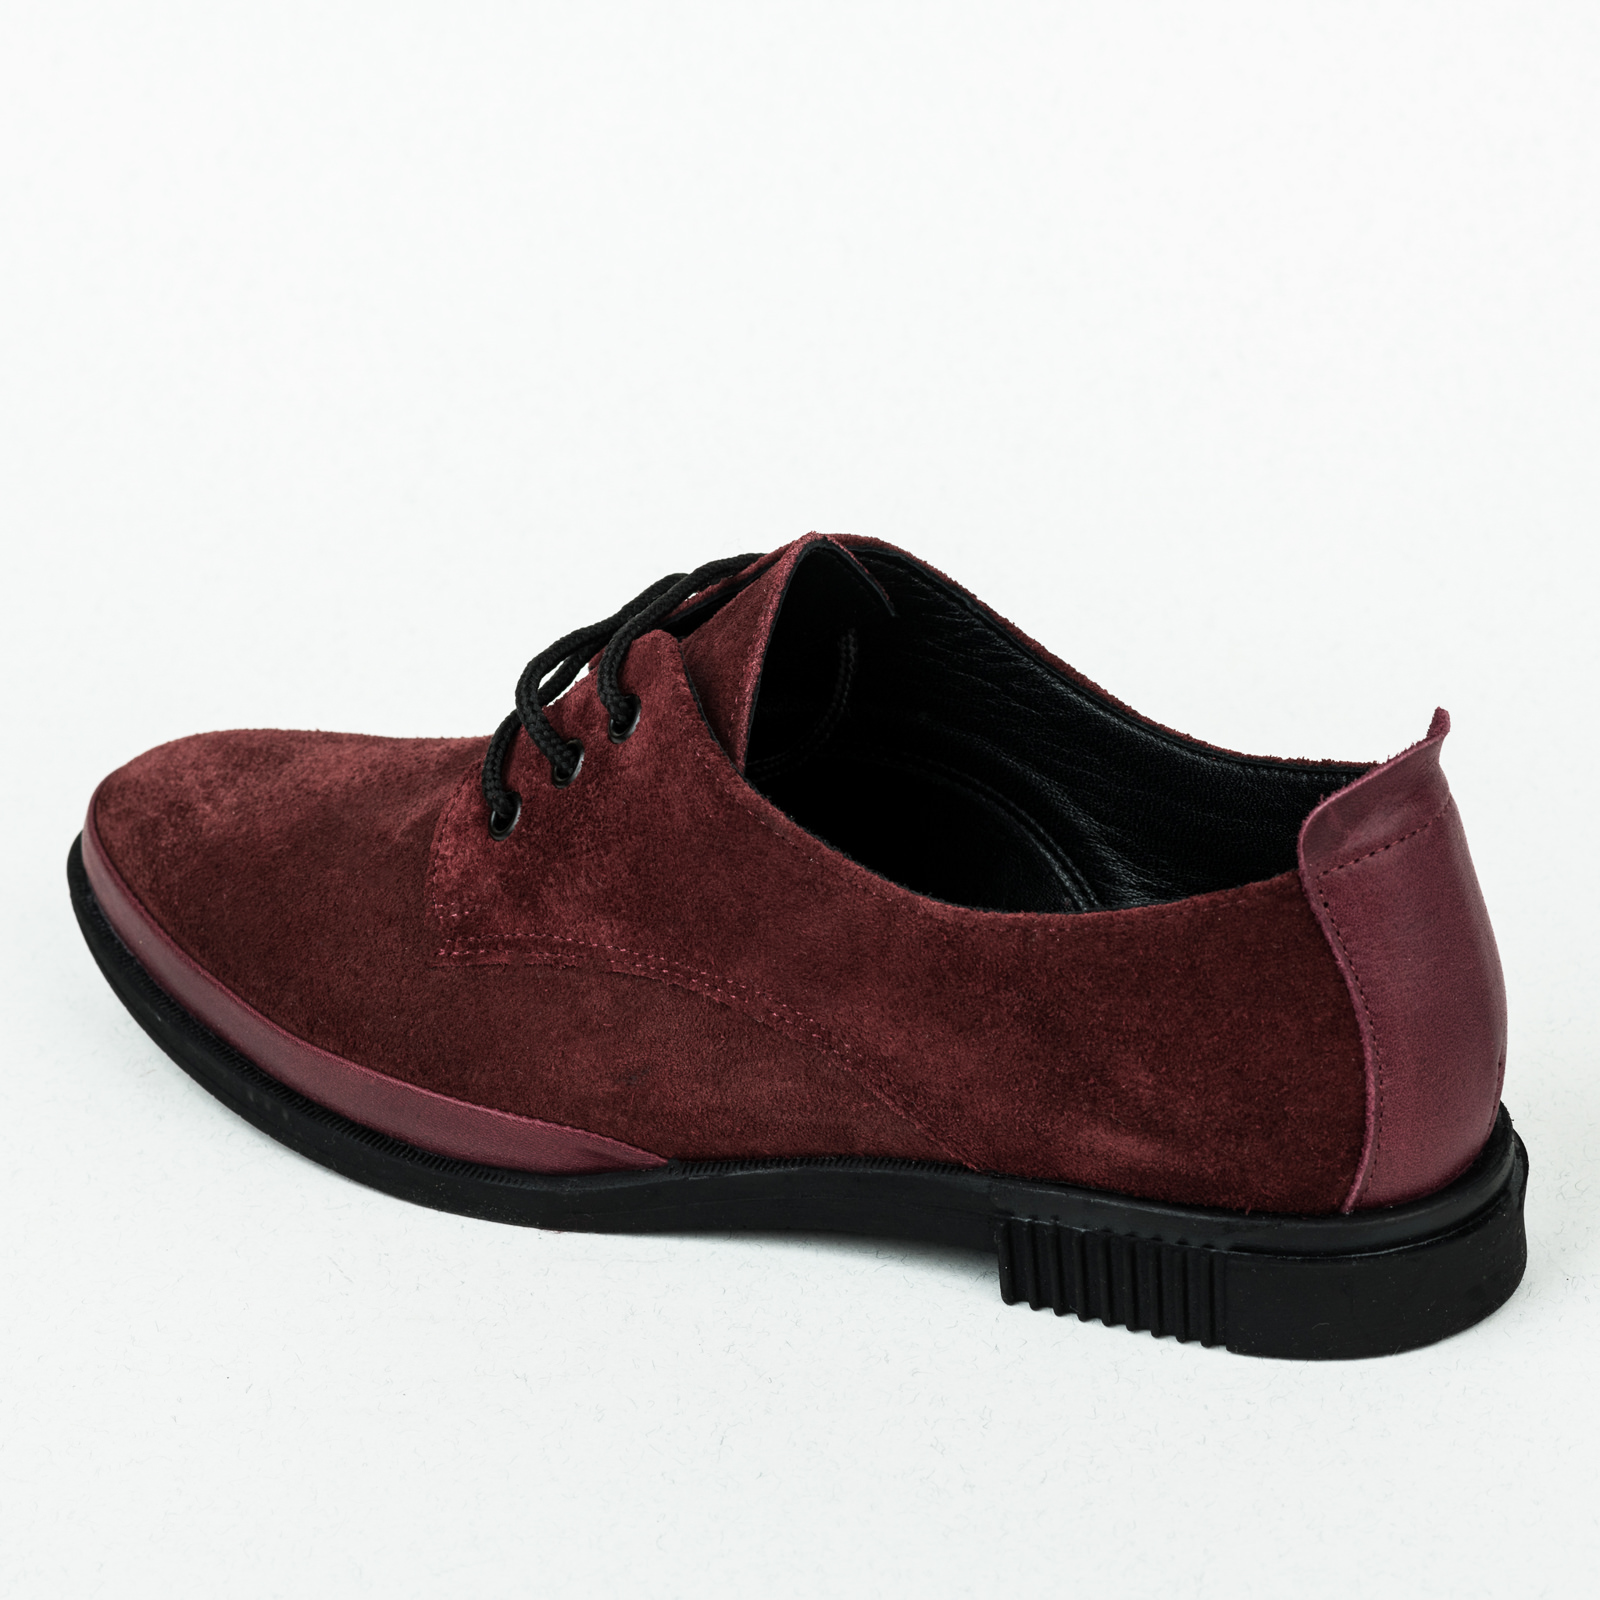 Leather shoes & flats B014 - WINE RED